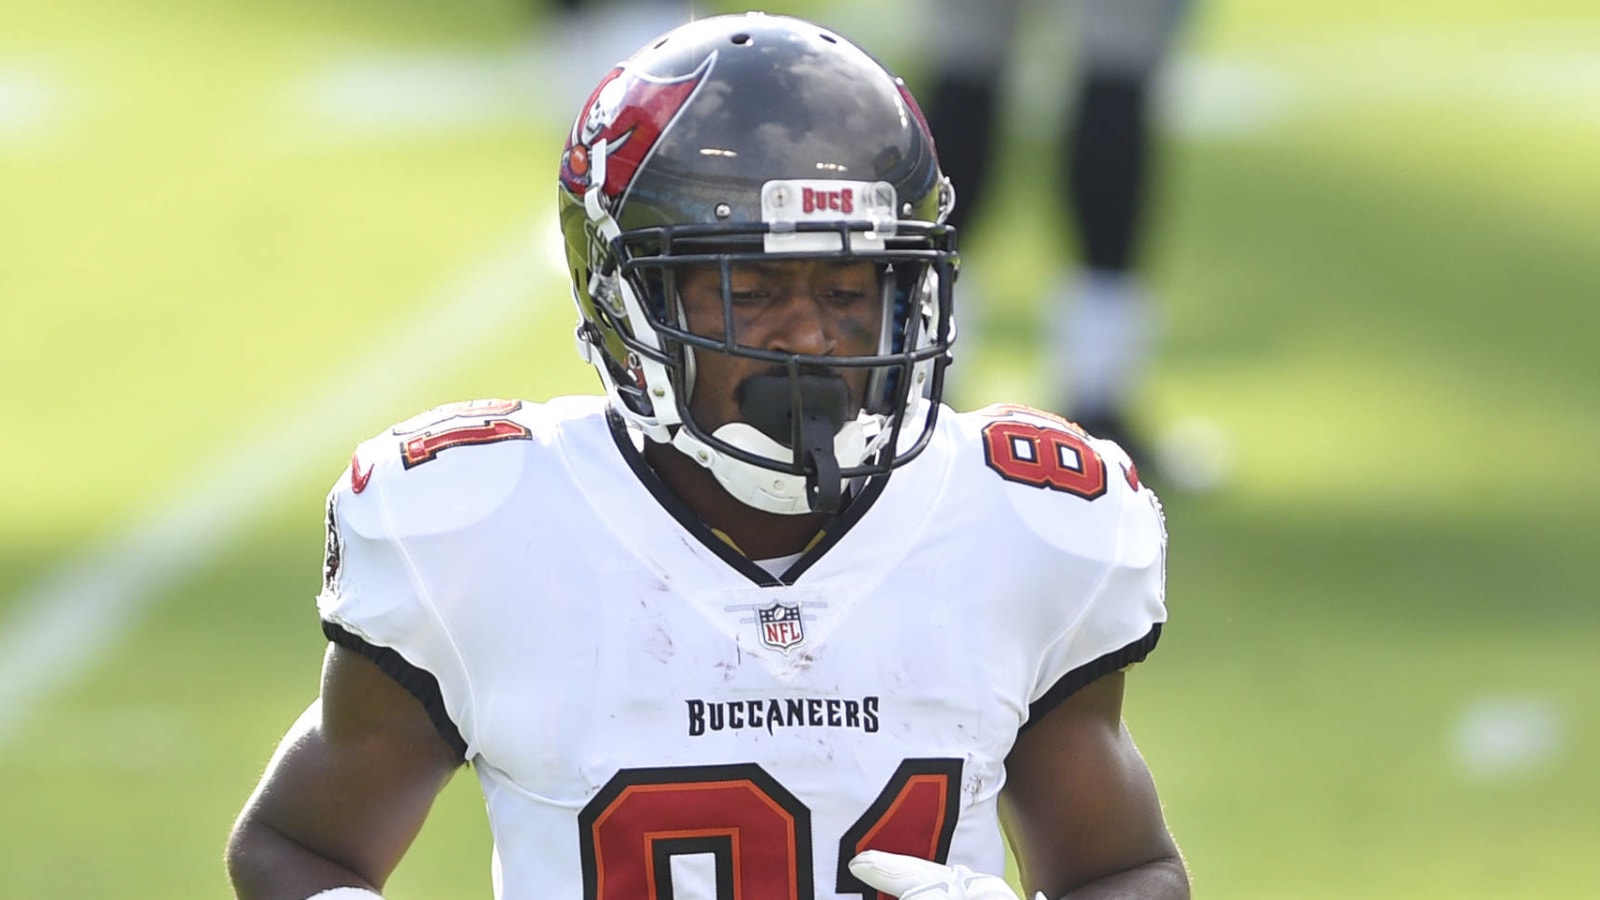 Buccaneers WR Antonio Brown’s probation ends one year early